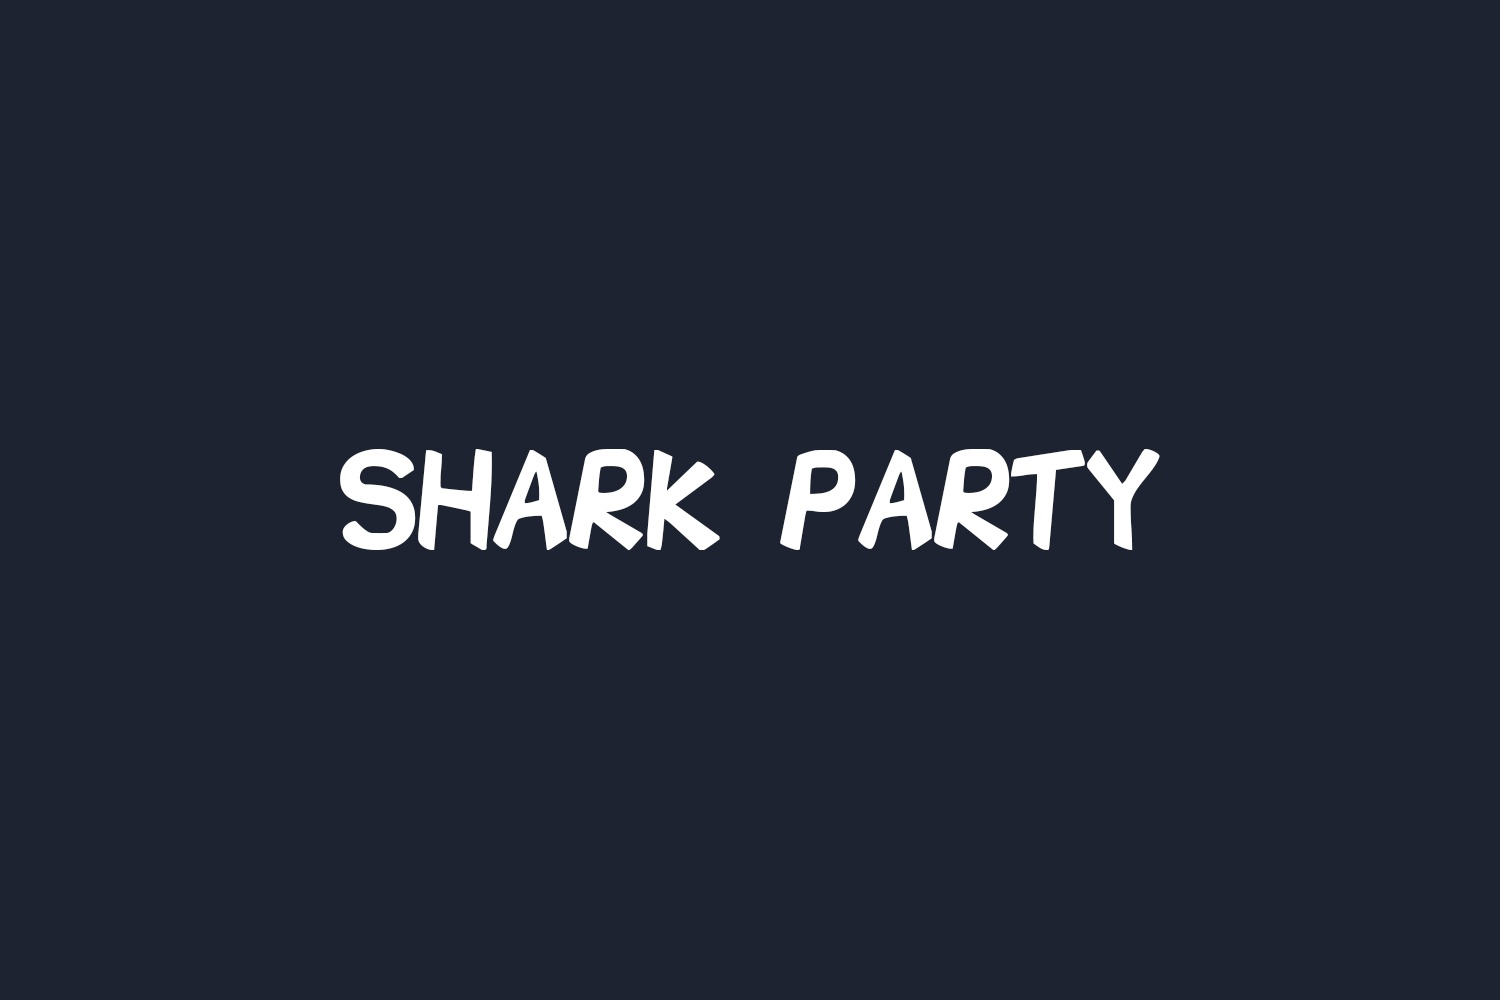 Shark Party Free Font